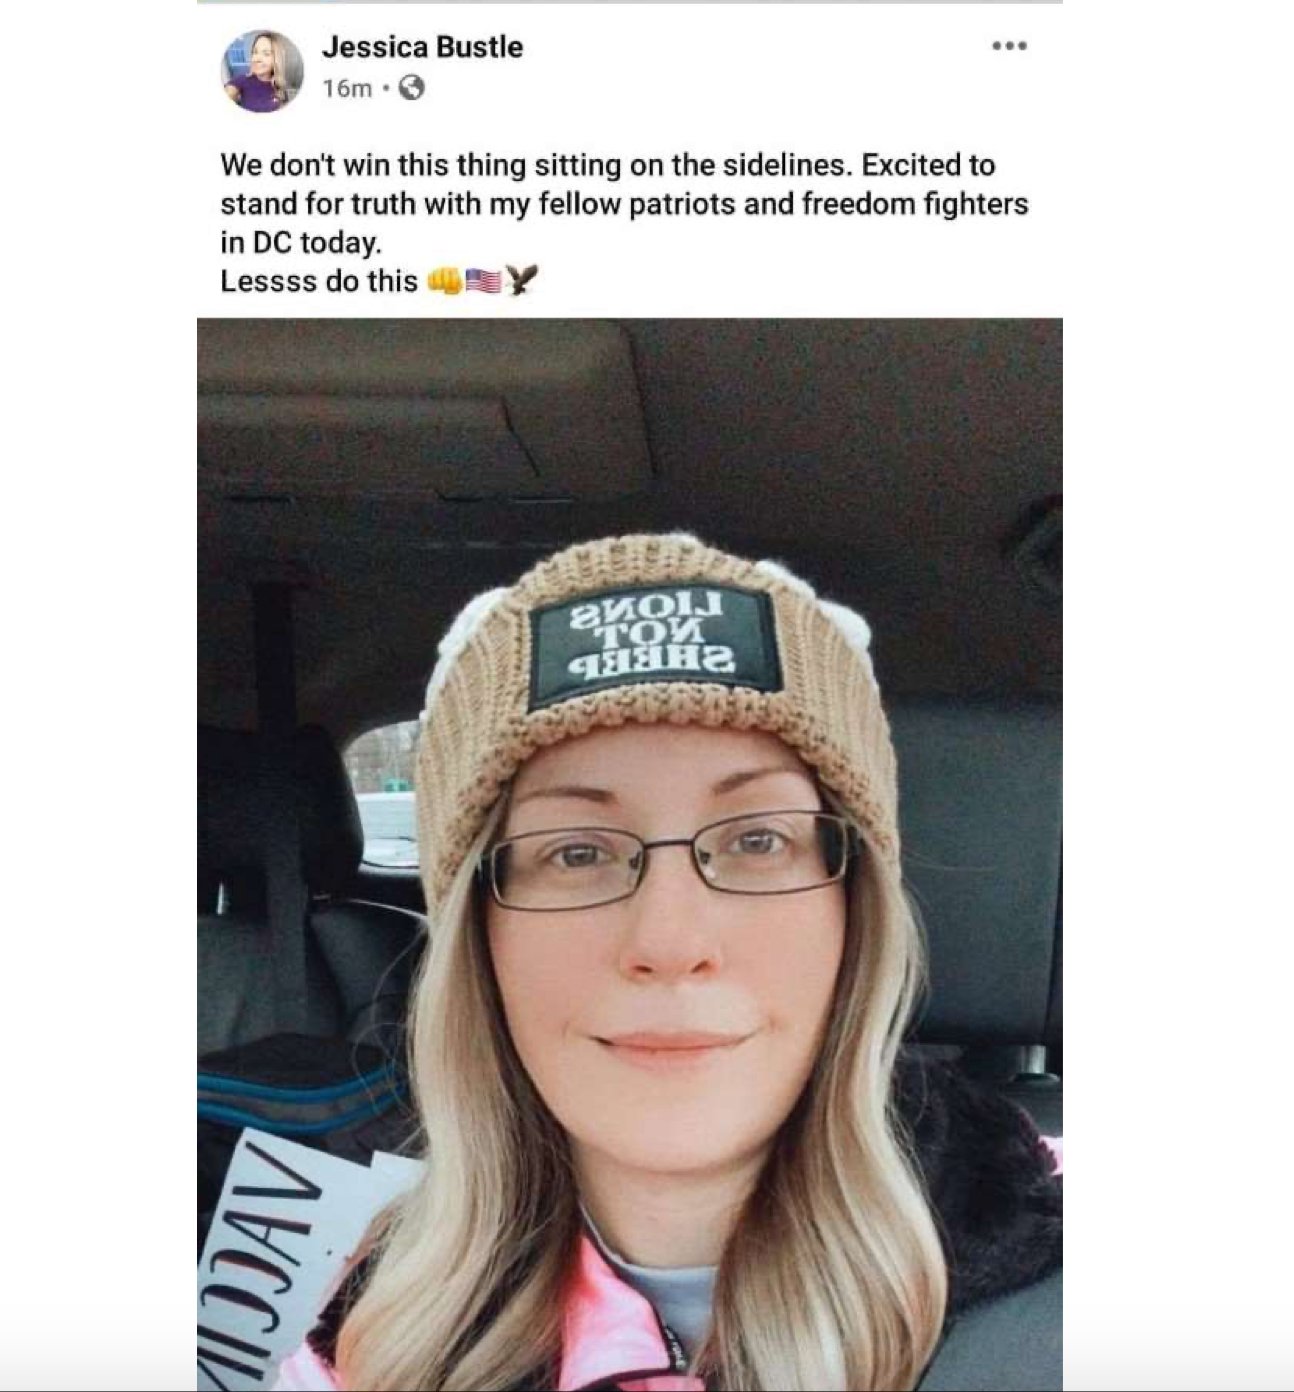 Jessica Bustle posts on Facebook that she will not stand on the sidelines.